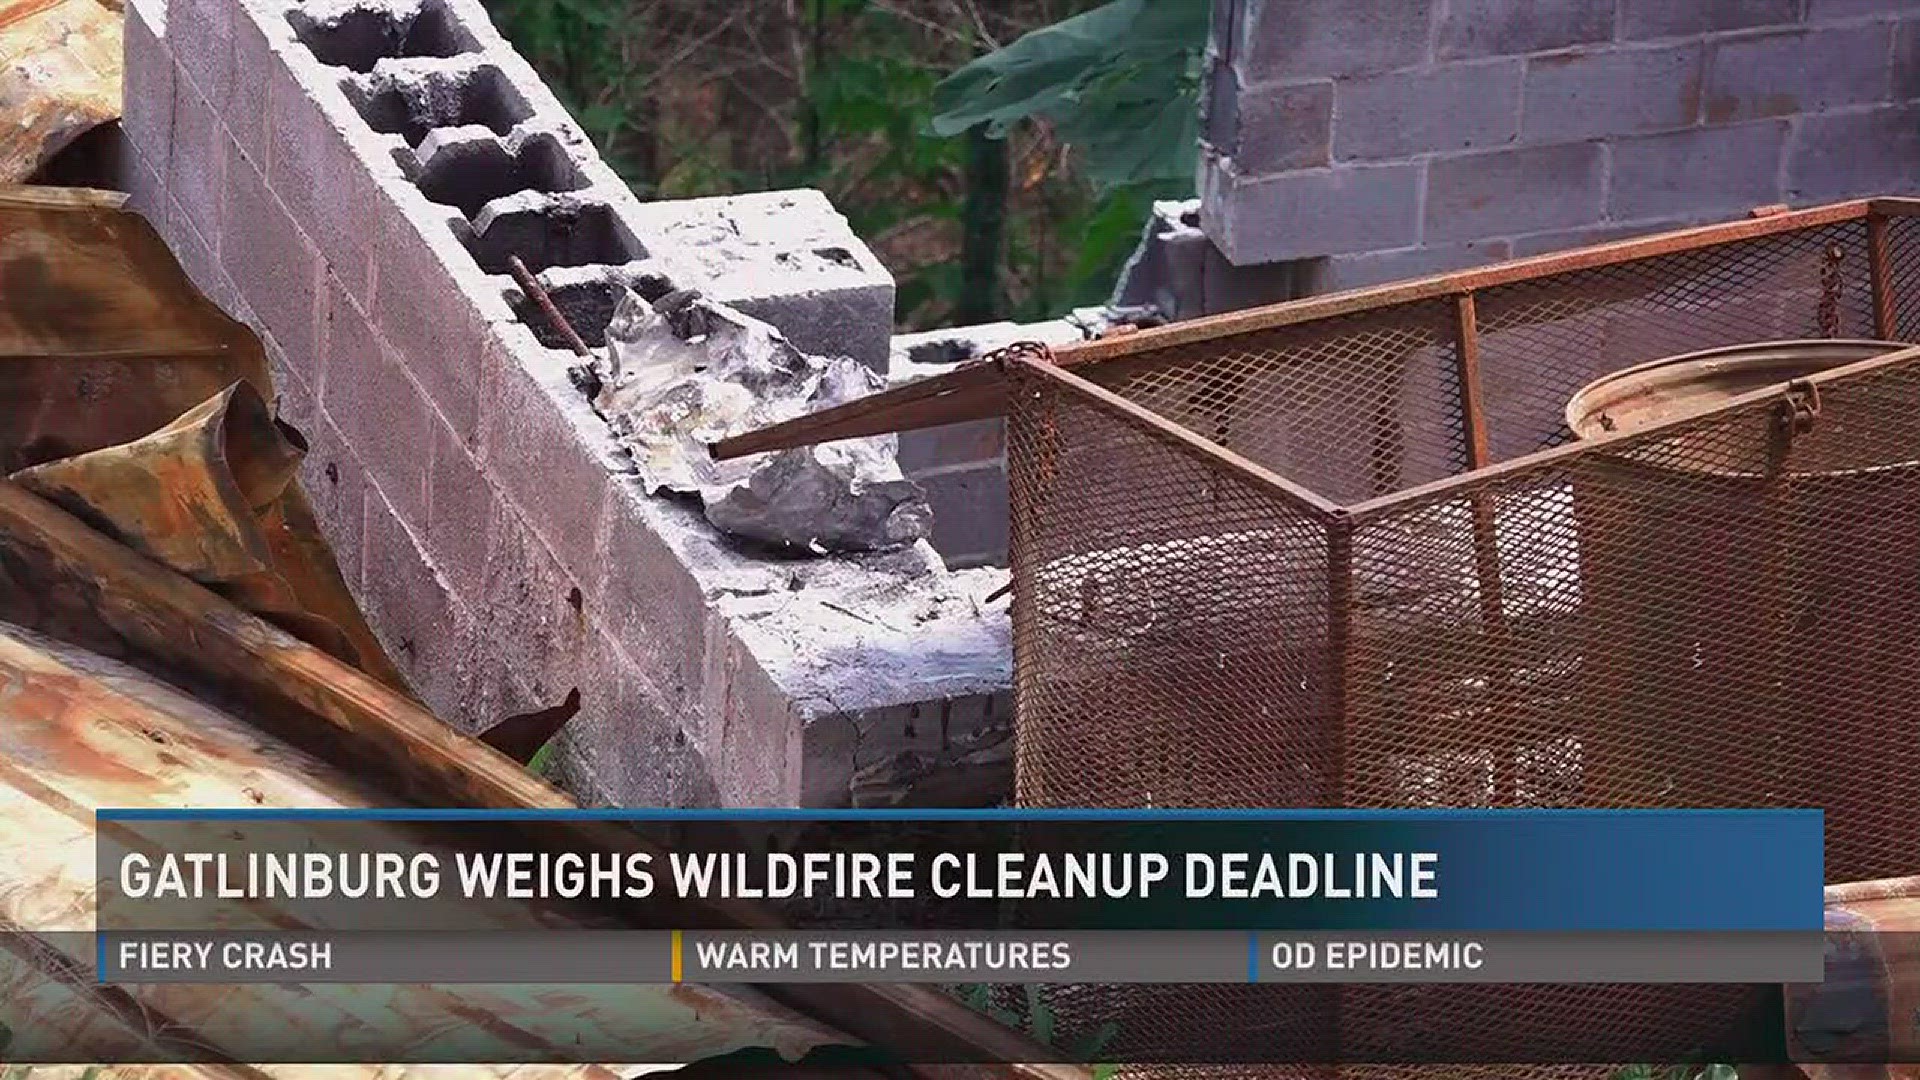 Sept. 26, 2017: With days to go until the deadline, Gatlinburg officials are considering an extension to the wildfire debris removal timeline.